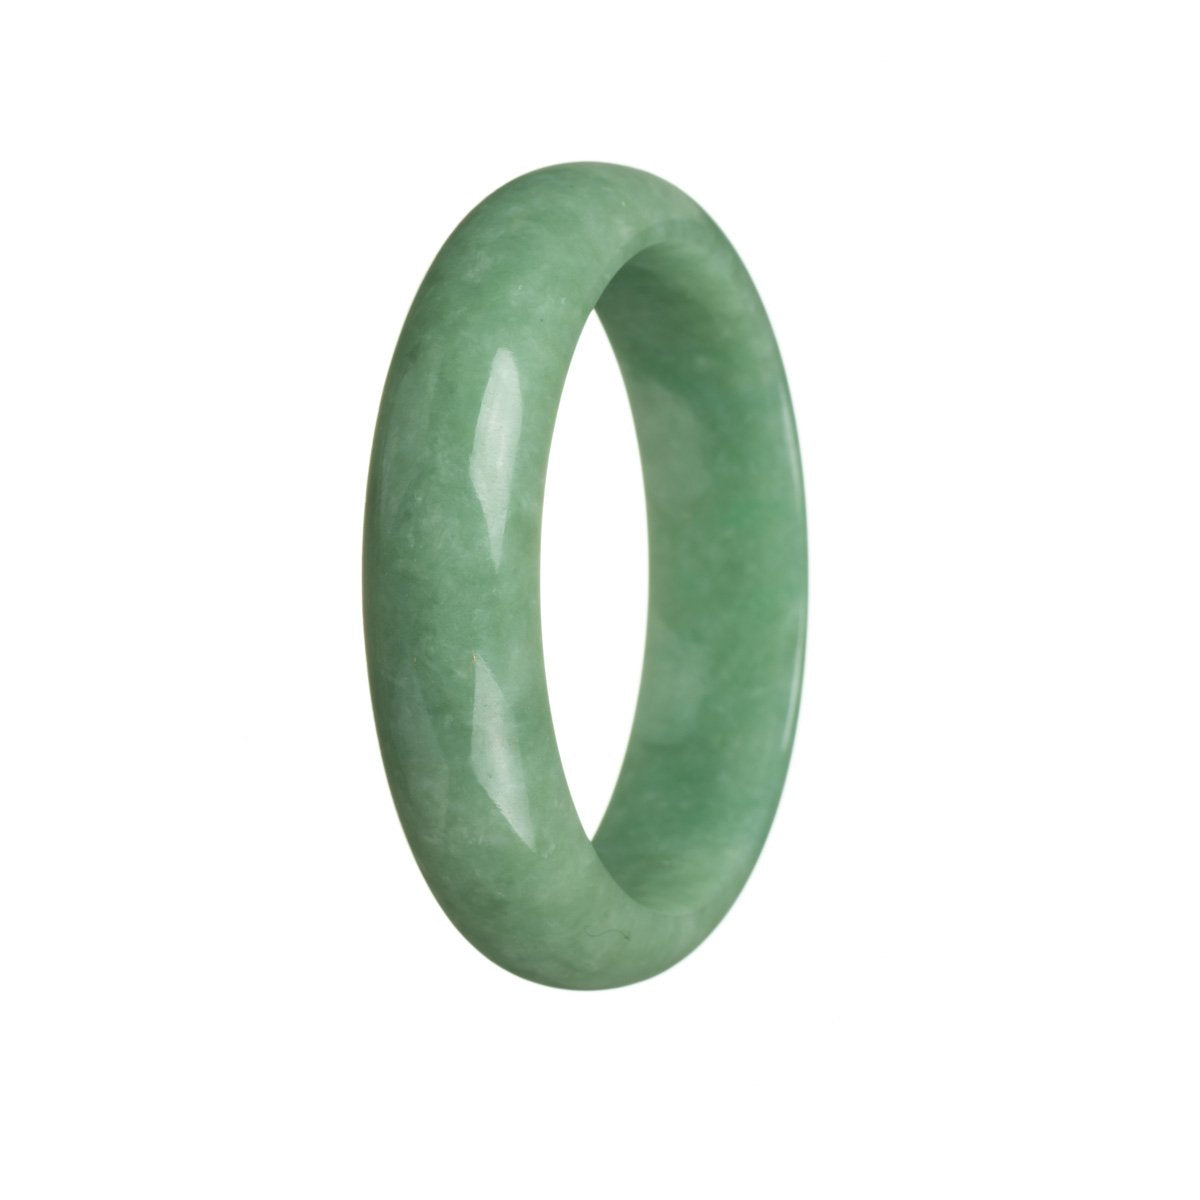 A close-up of a genuine Grade A green jade bracelet with a 59mm half moon shape, beautifully crafted by MAYS.